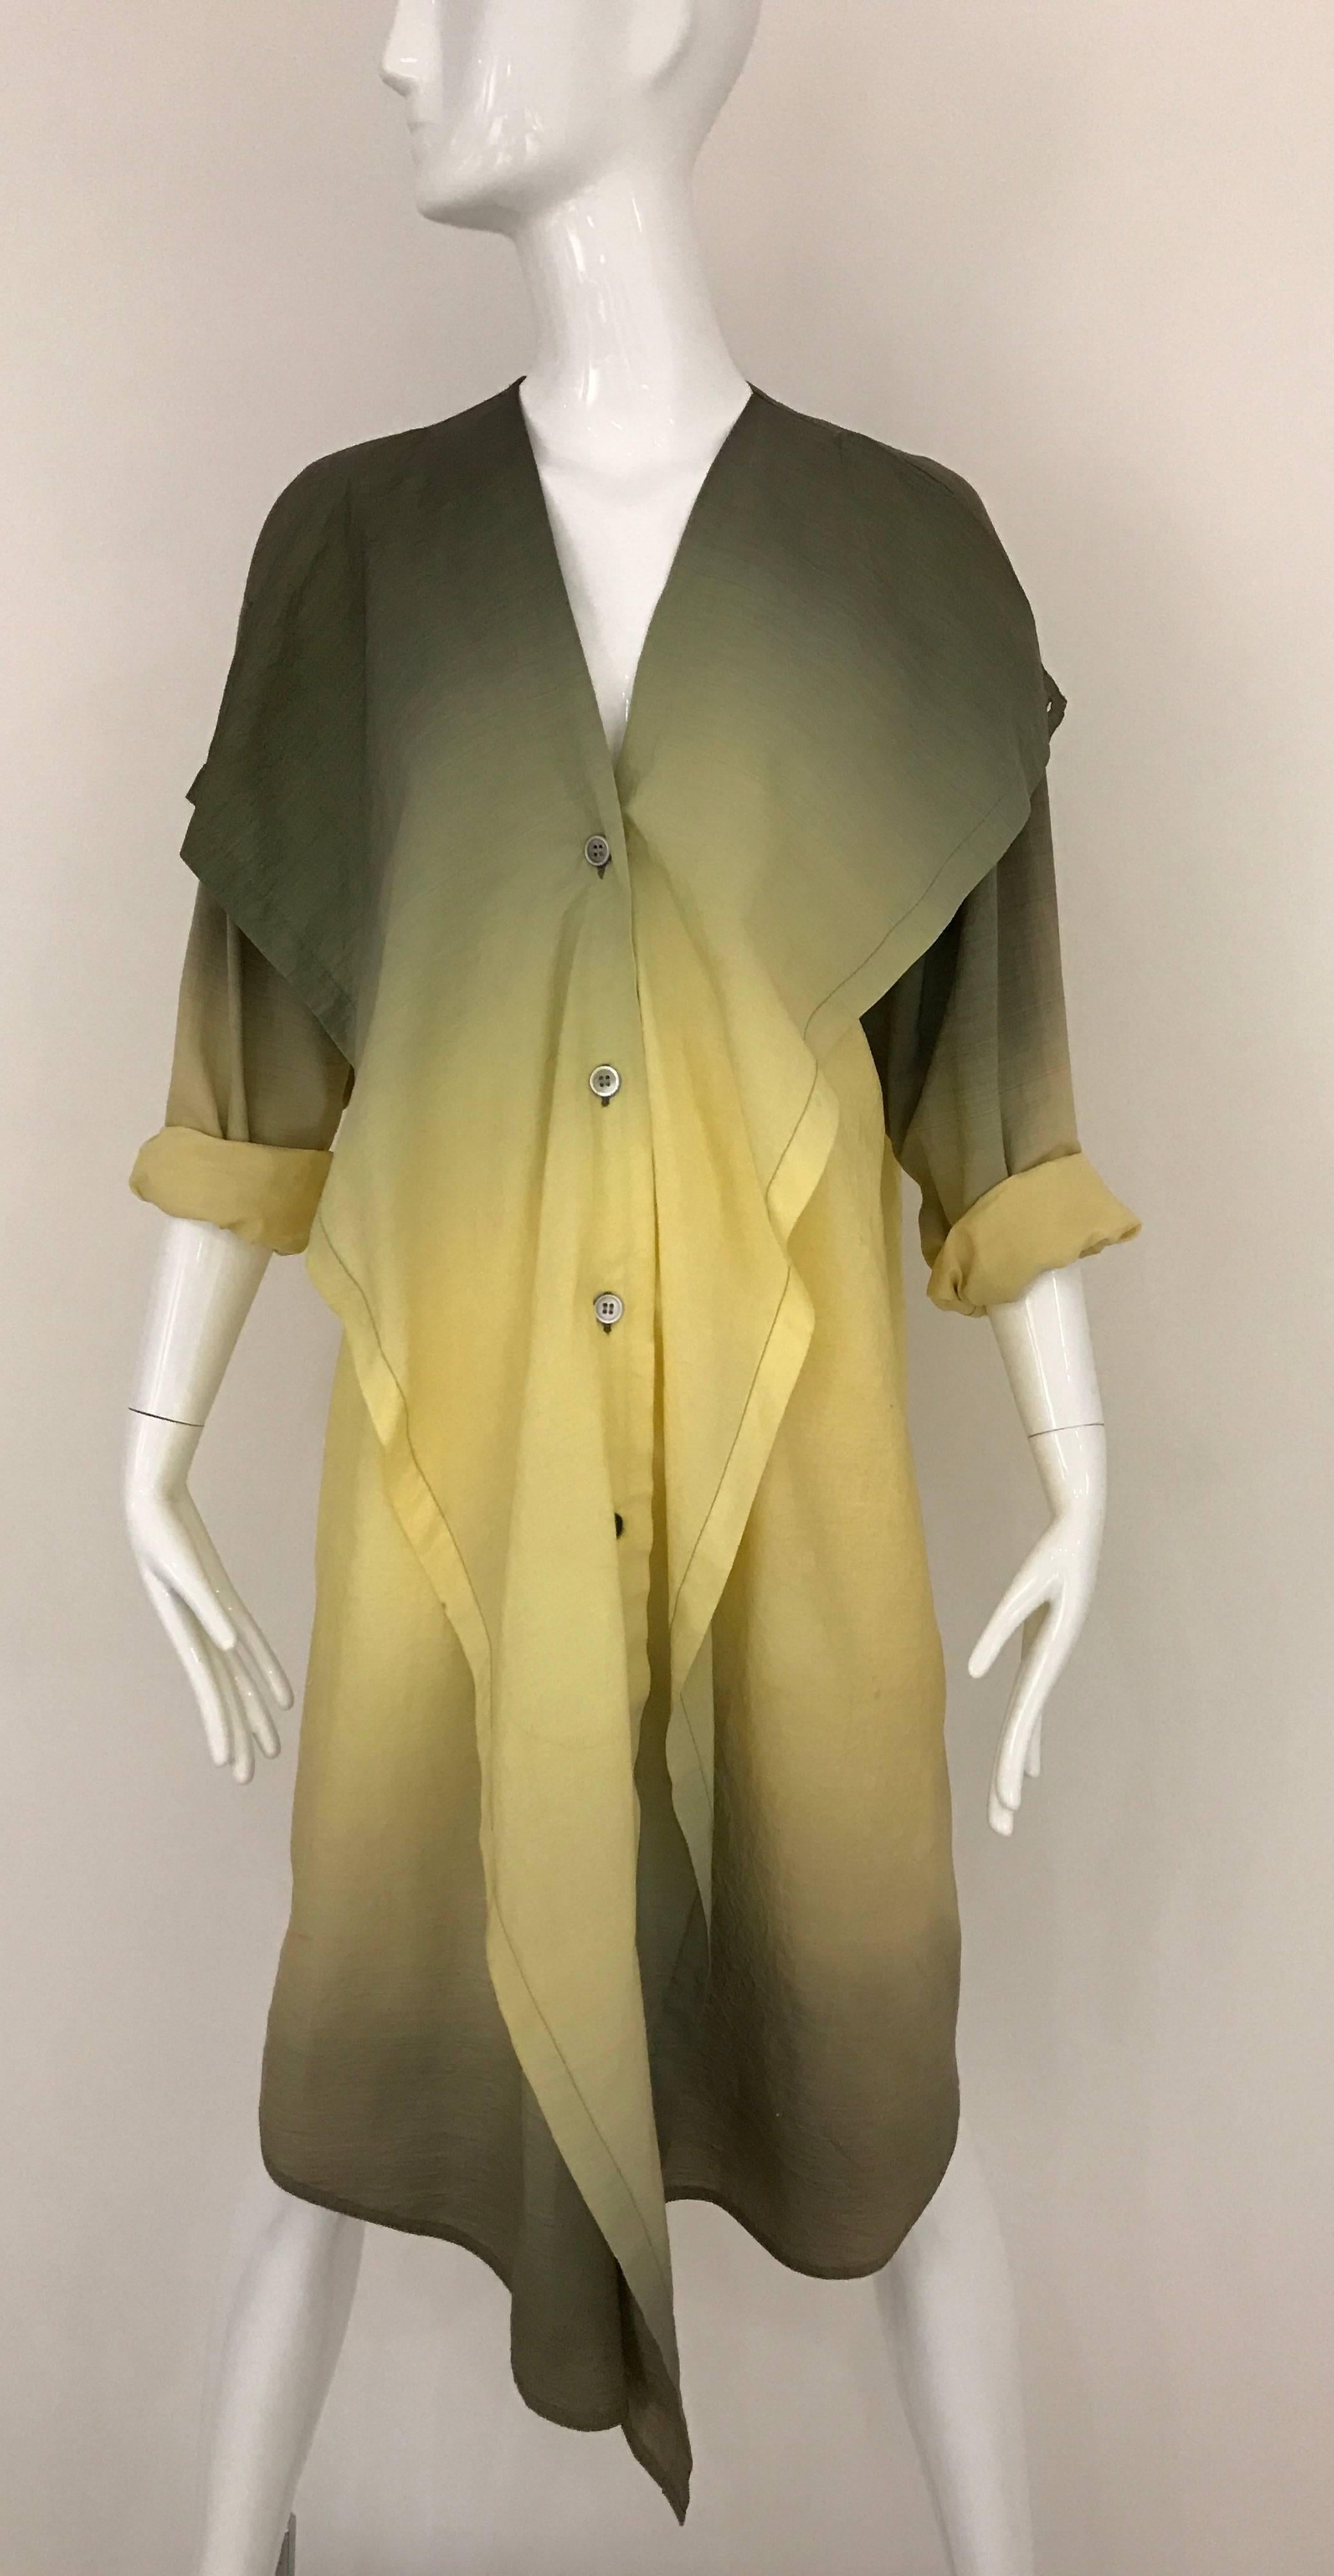 Vintage early 1990s ISSEY MIYAKE green and yellow ombré 2 tones cotton shirt dress. Button in the front. 
Size Medium -Large 6/8

*** light water marks stains see image #9#10
